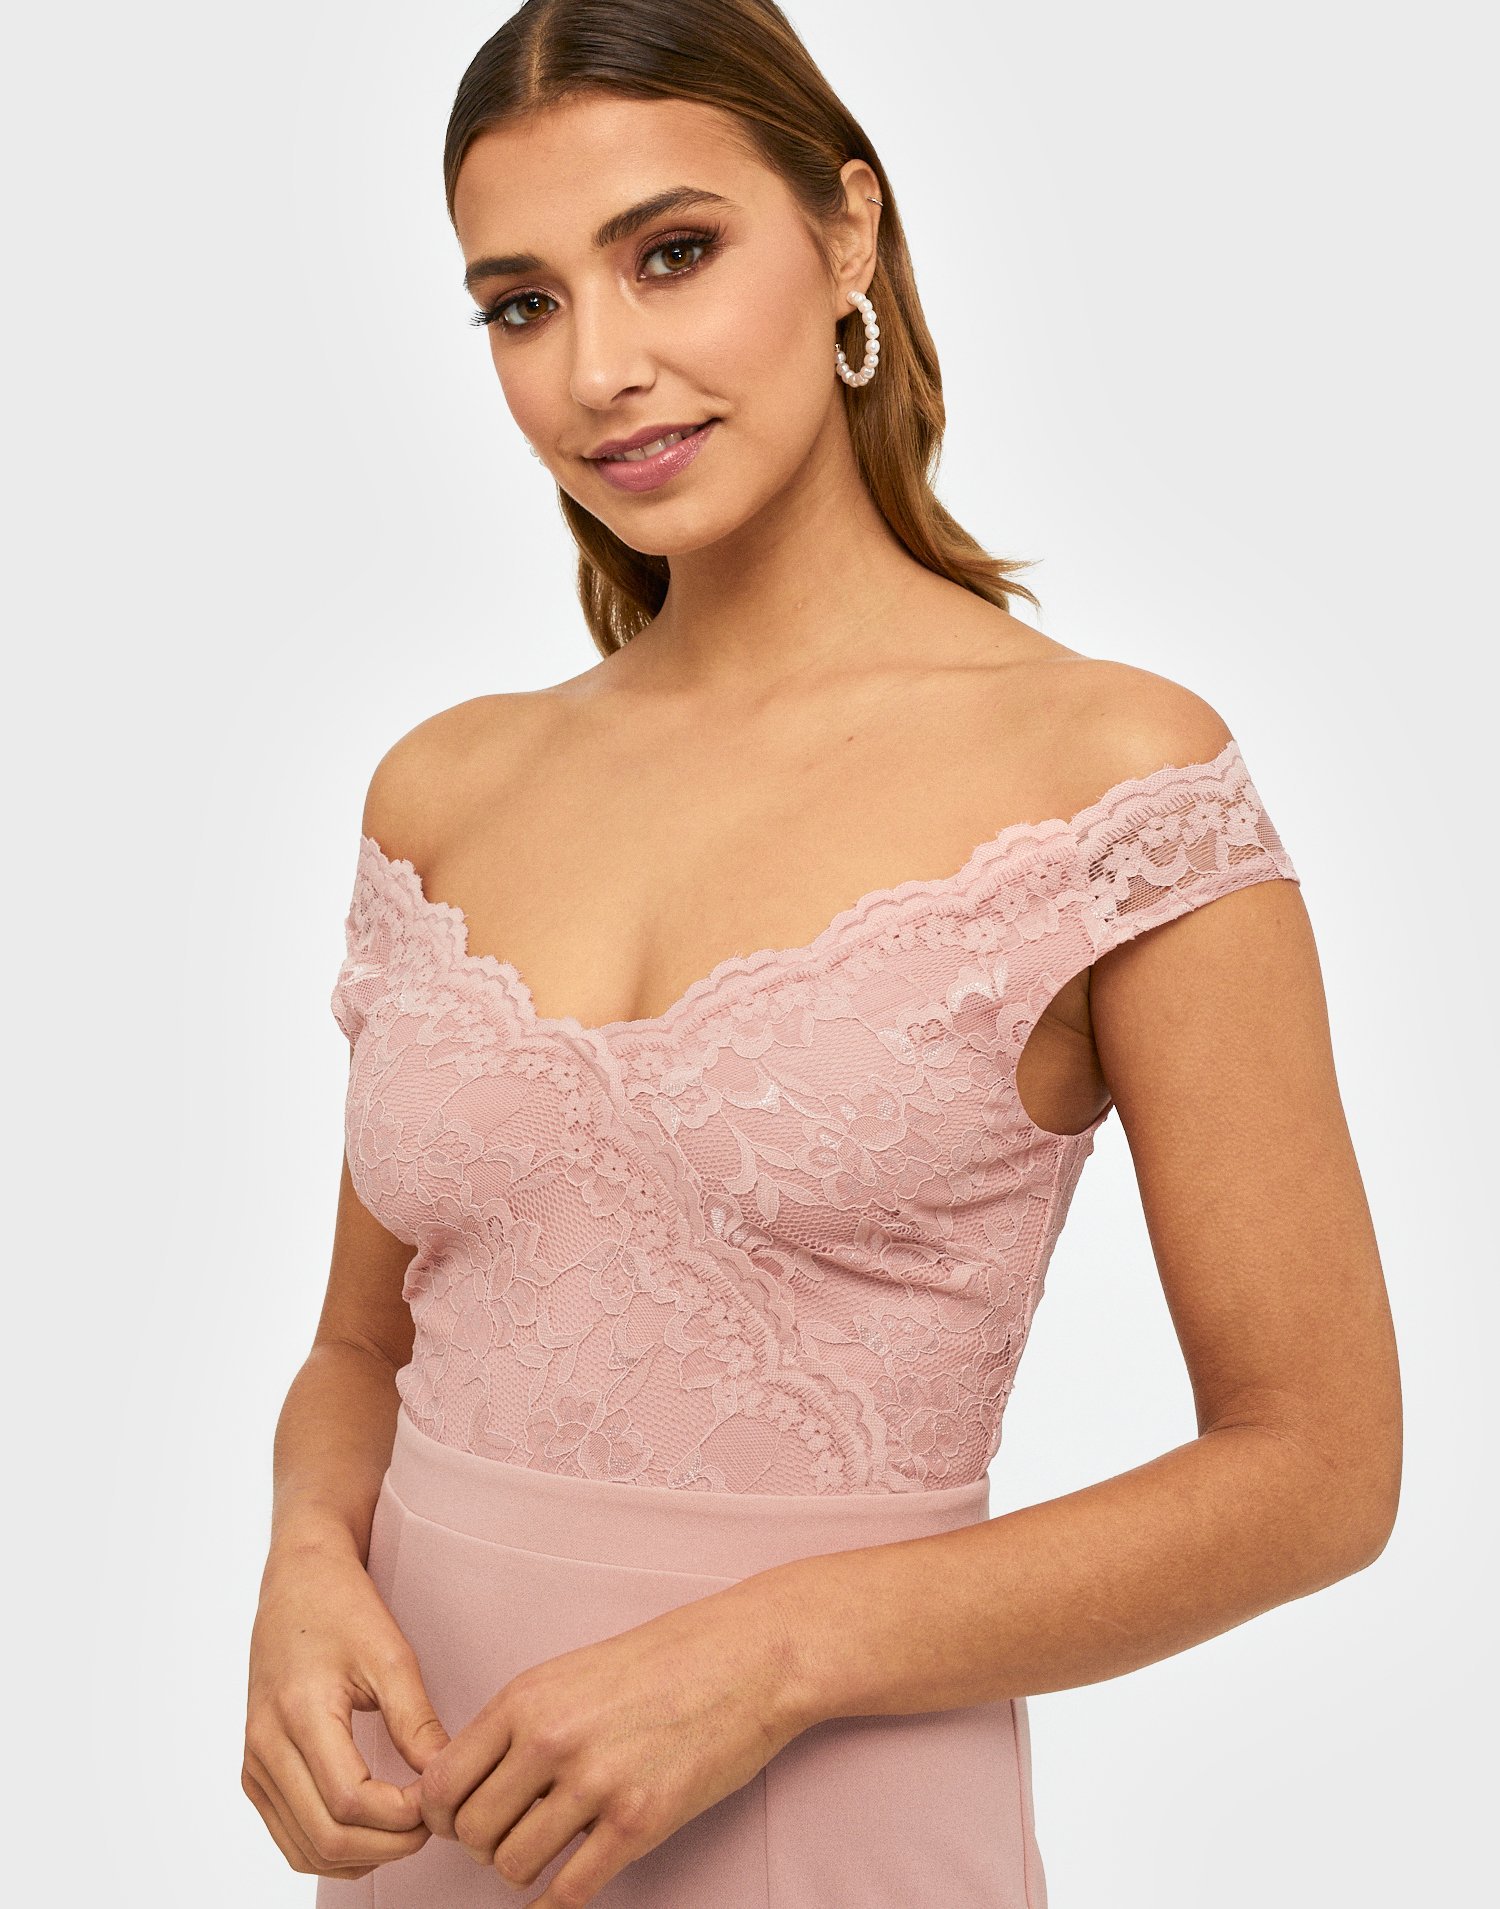 mermaid lace gown nelly